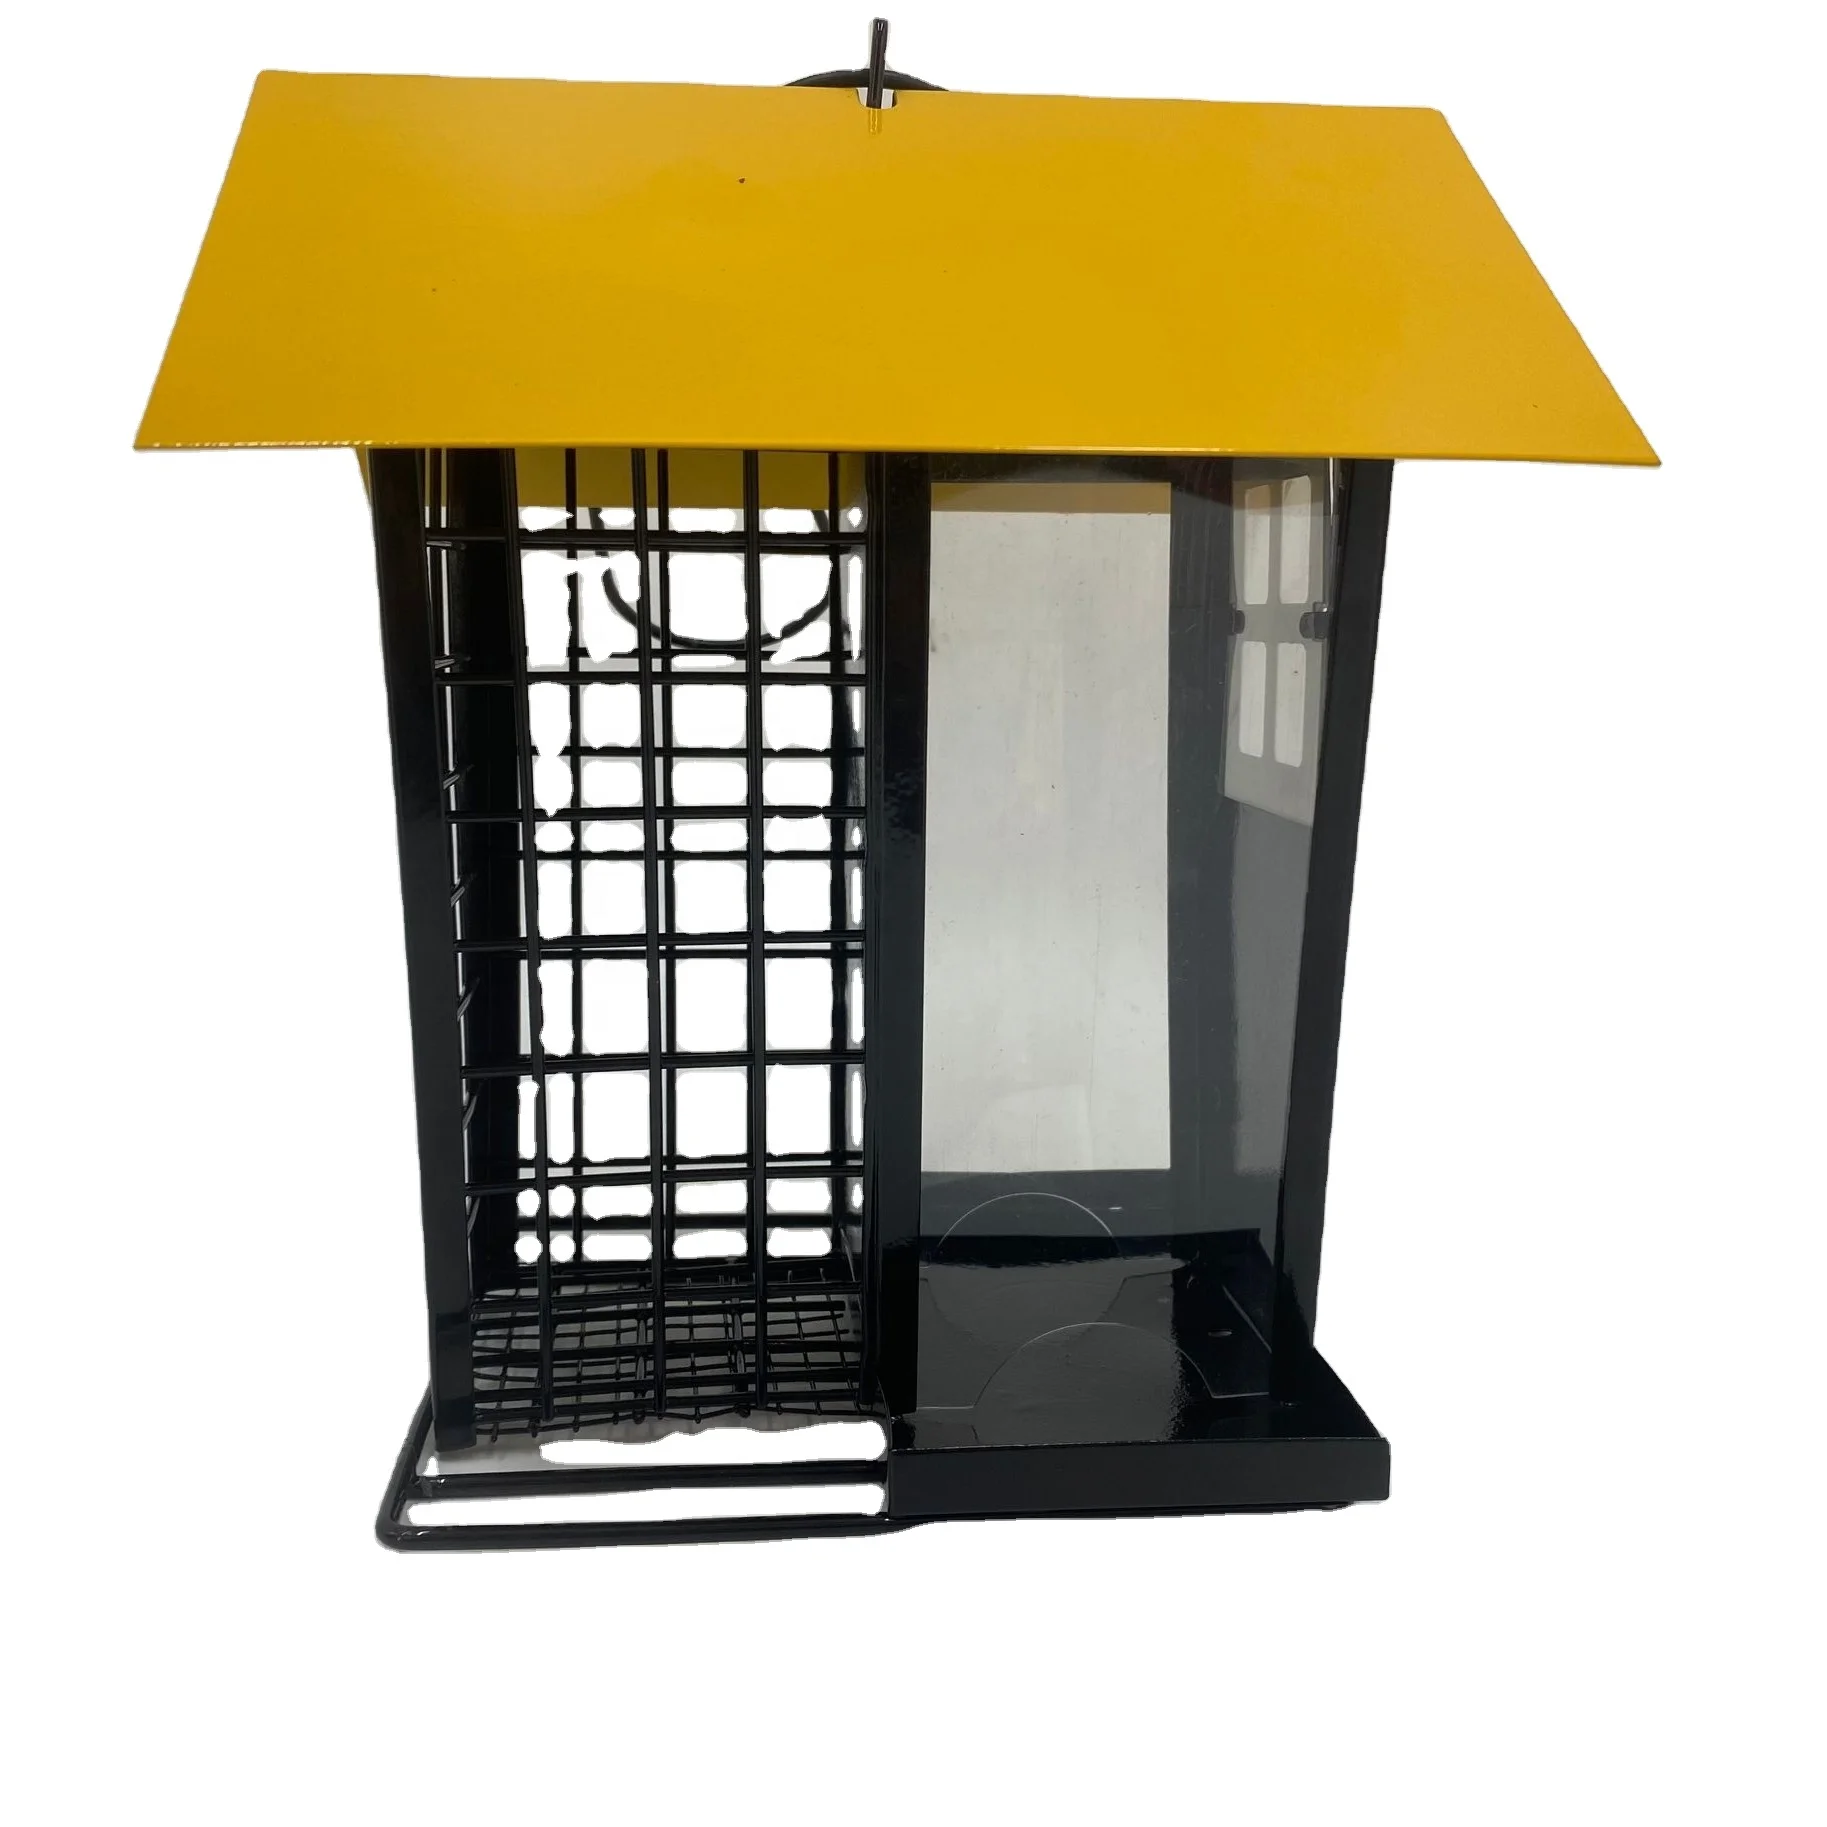 

Pet Gray seed duo wild bird feeder gray and green black and yellow color, Any color /black+yellow/others